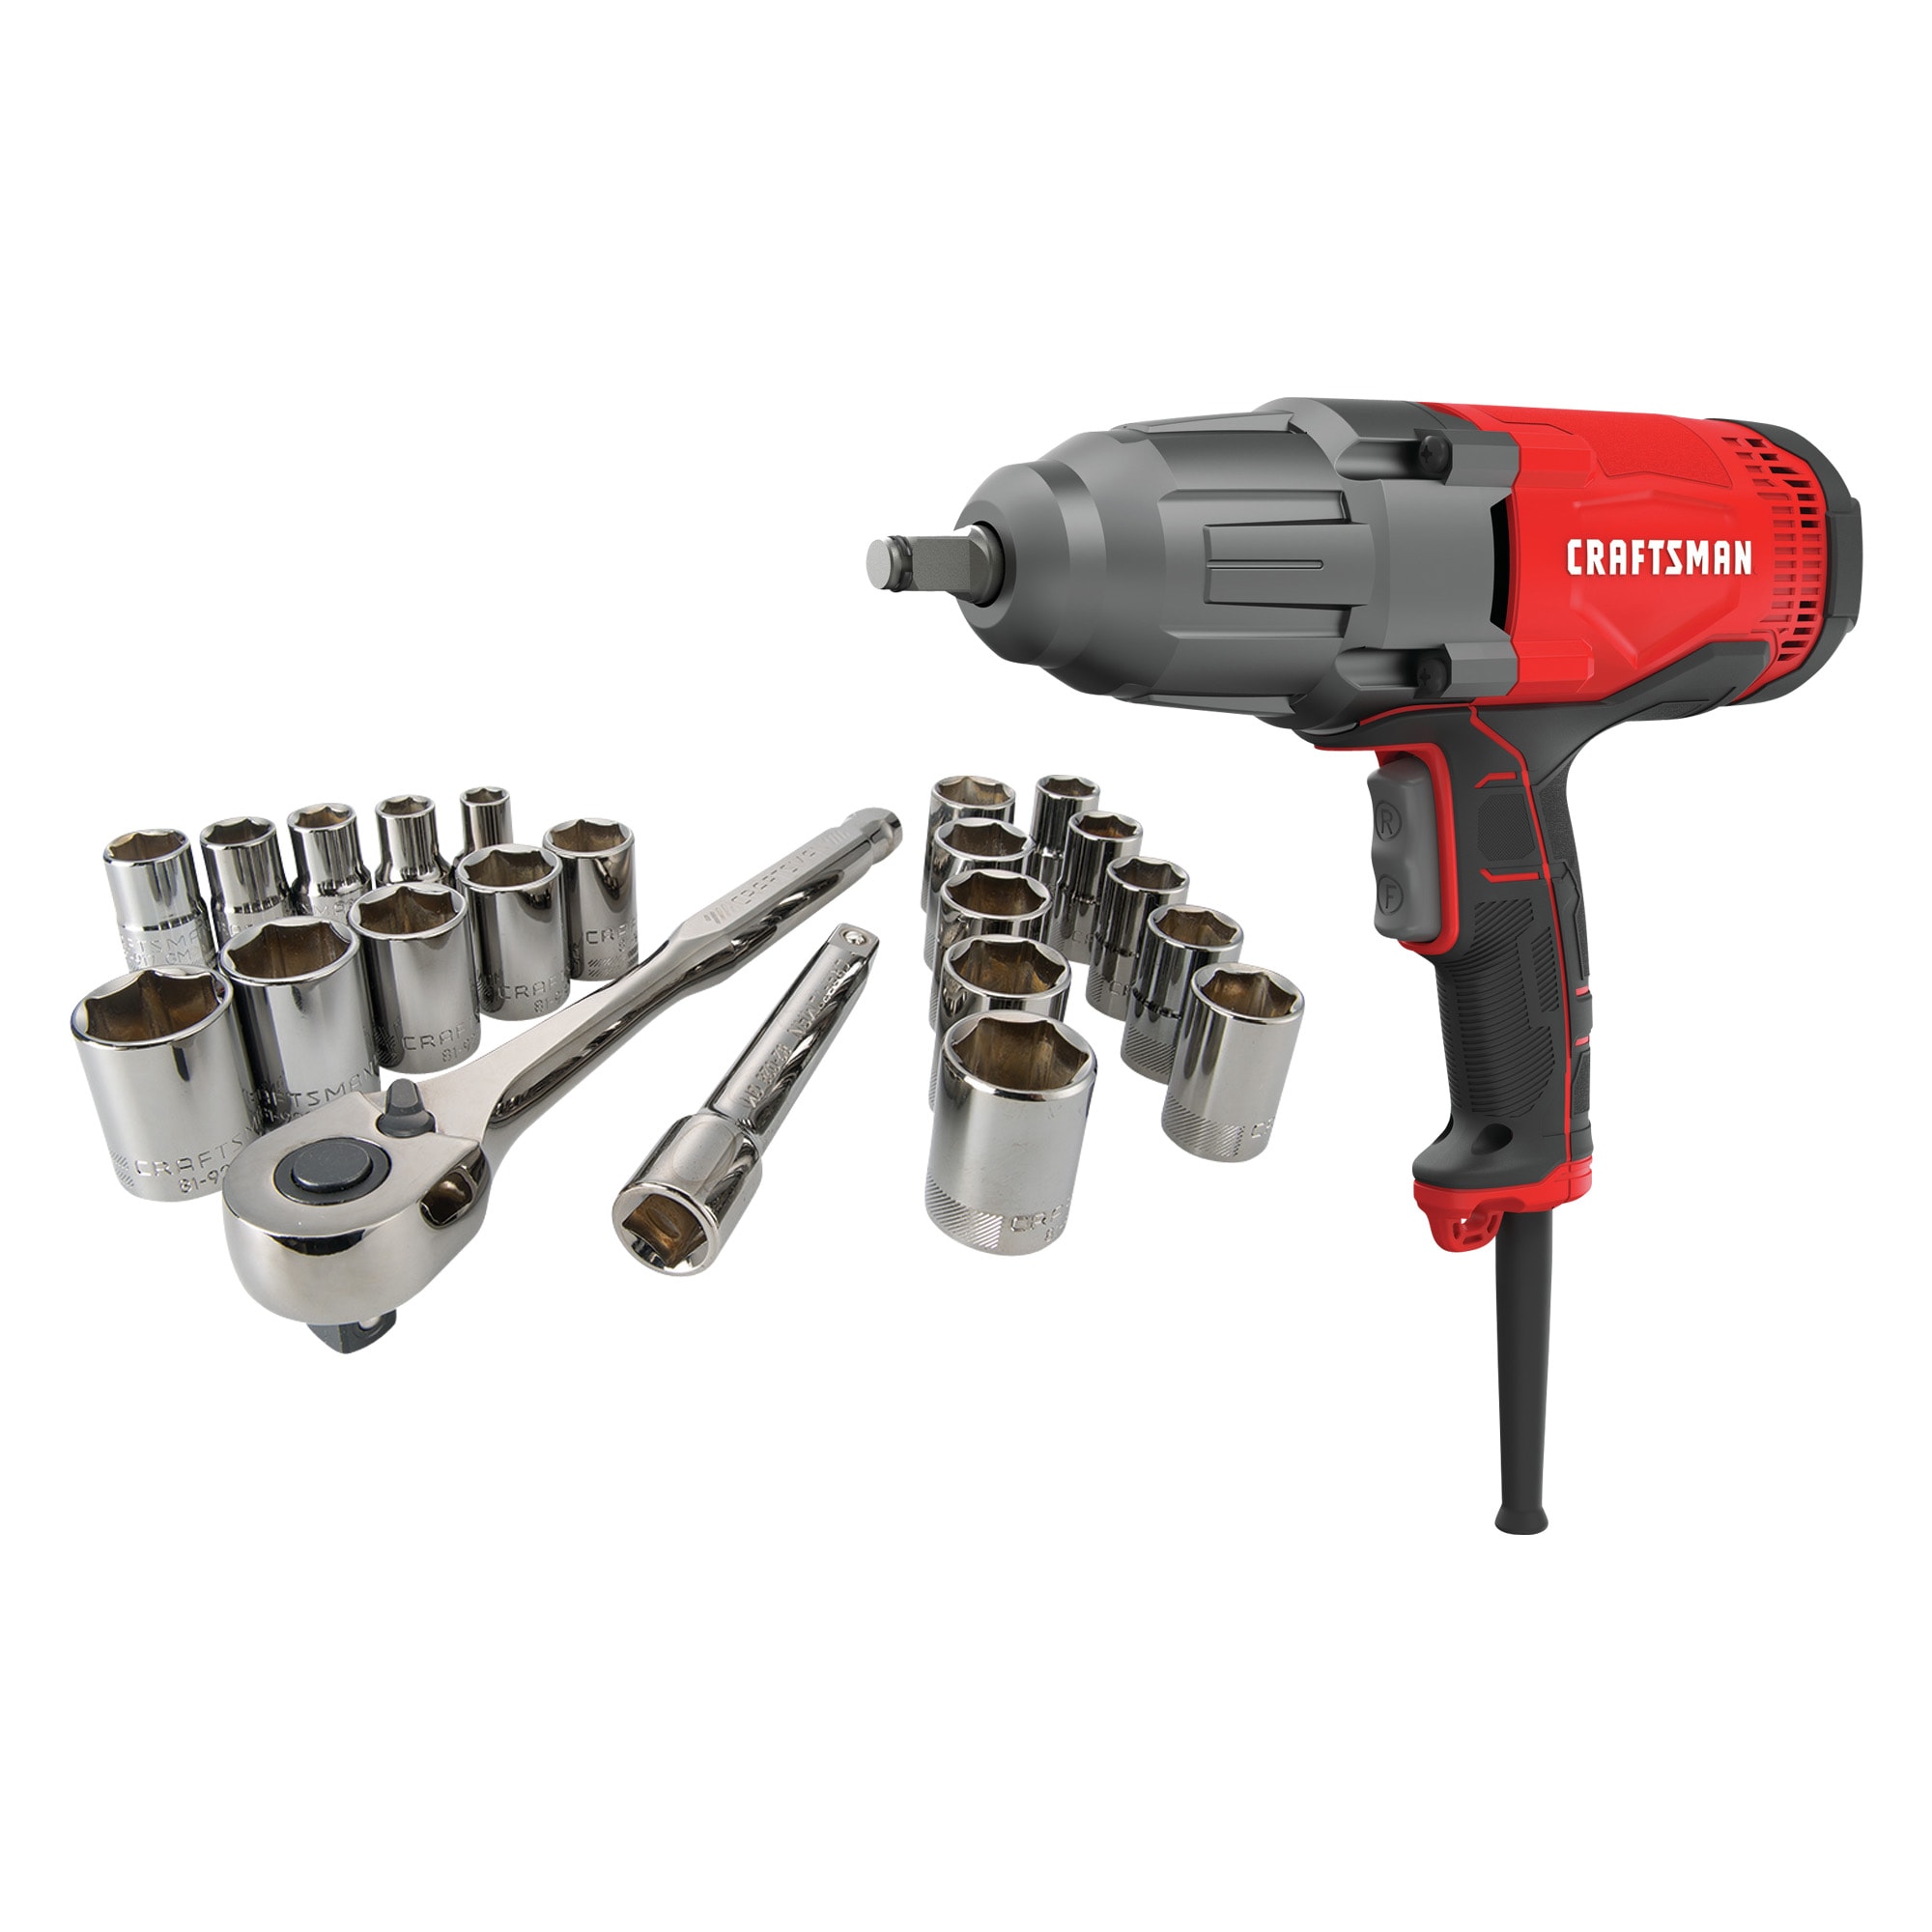 CRAFTSMAN 7.5 Amp Variable Speed 1/2-in Drive Corded Impact Wrench & 22-Piece Standard (SAE) and Metric Combination Gunmetal Chrome Mechanics Tool